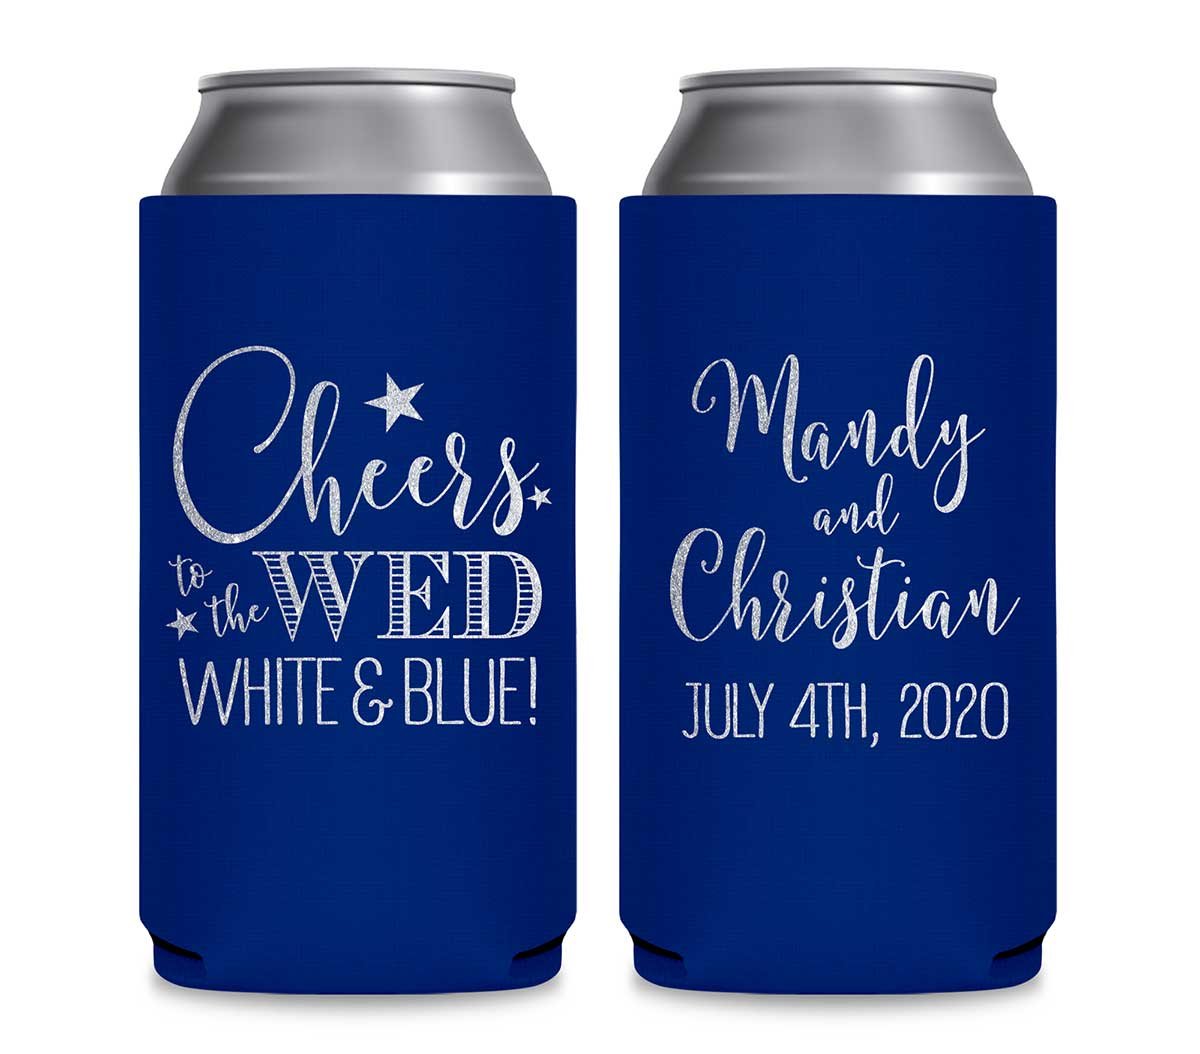 Cheers To The Wed White & Blue 1A Foldable 12 oz Slim Can Koozies Wedding Gifts for Guests